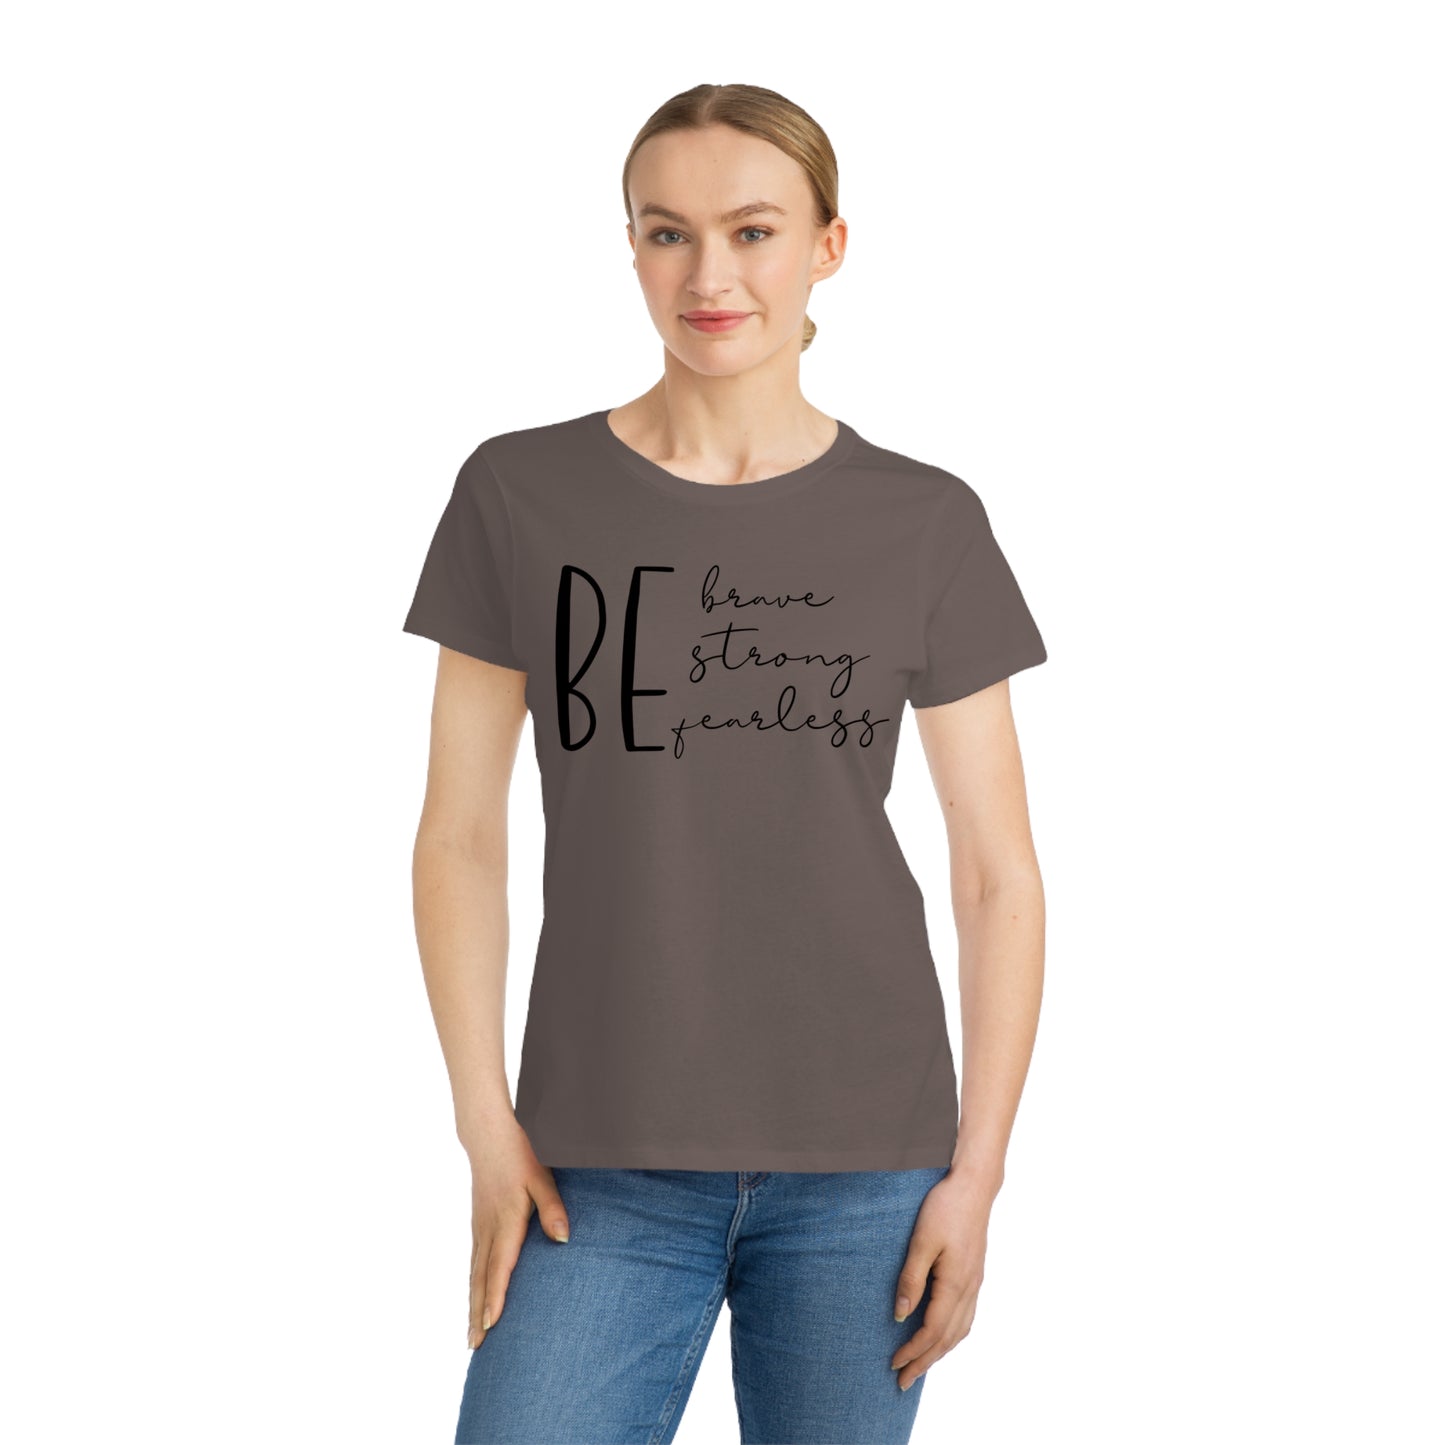 Organic Women's Brave, Strong & Fearless T-Shirt - The Oracle Alchemist